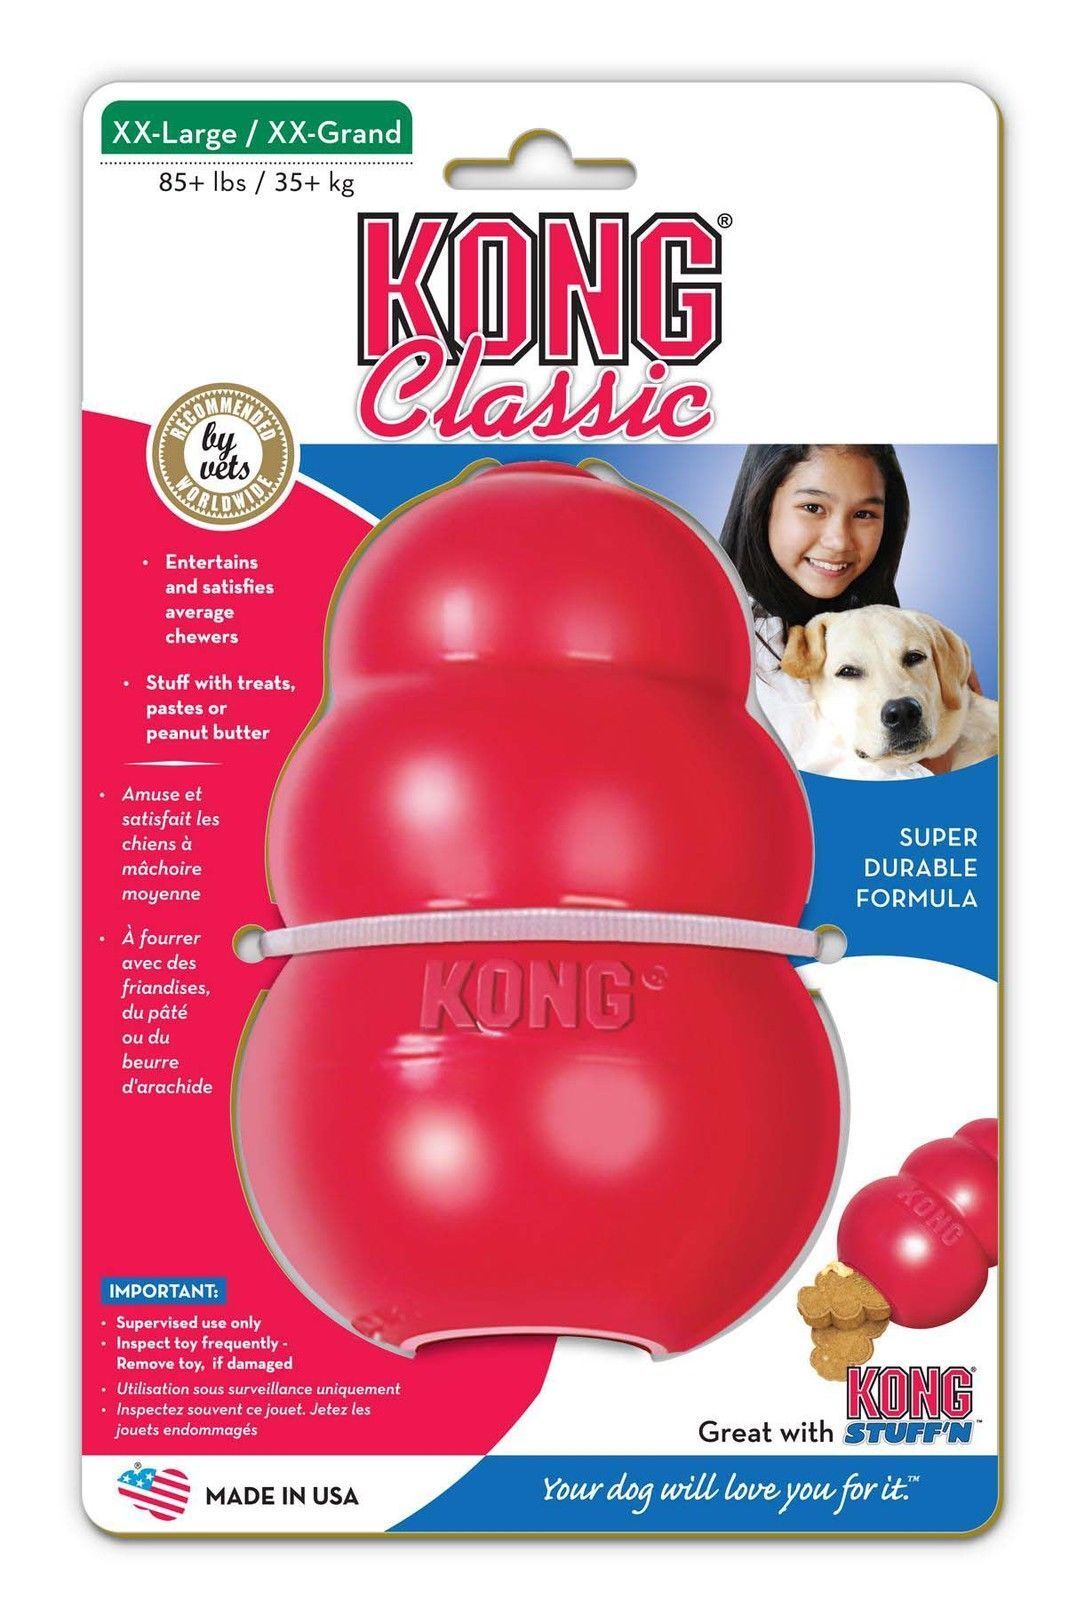 4 x KONG Classic Red Stuffable Non-Toxic Fetch Interactive Dog Toy - Medium image 1